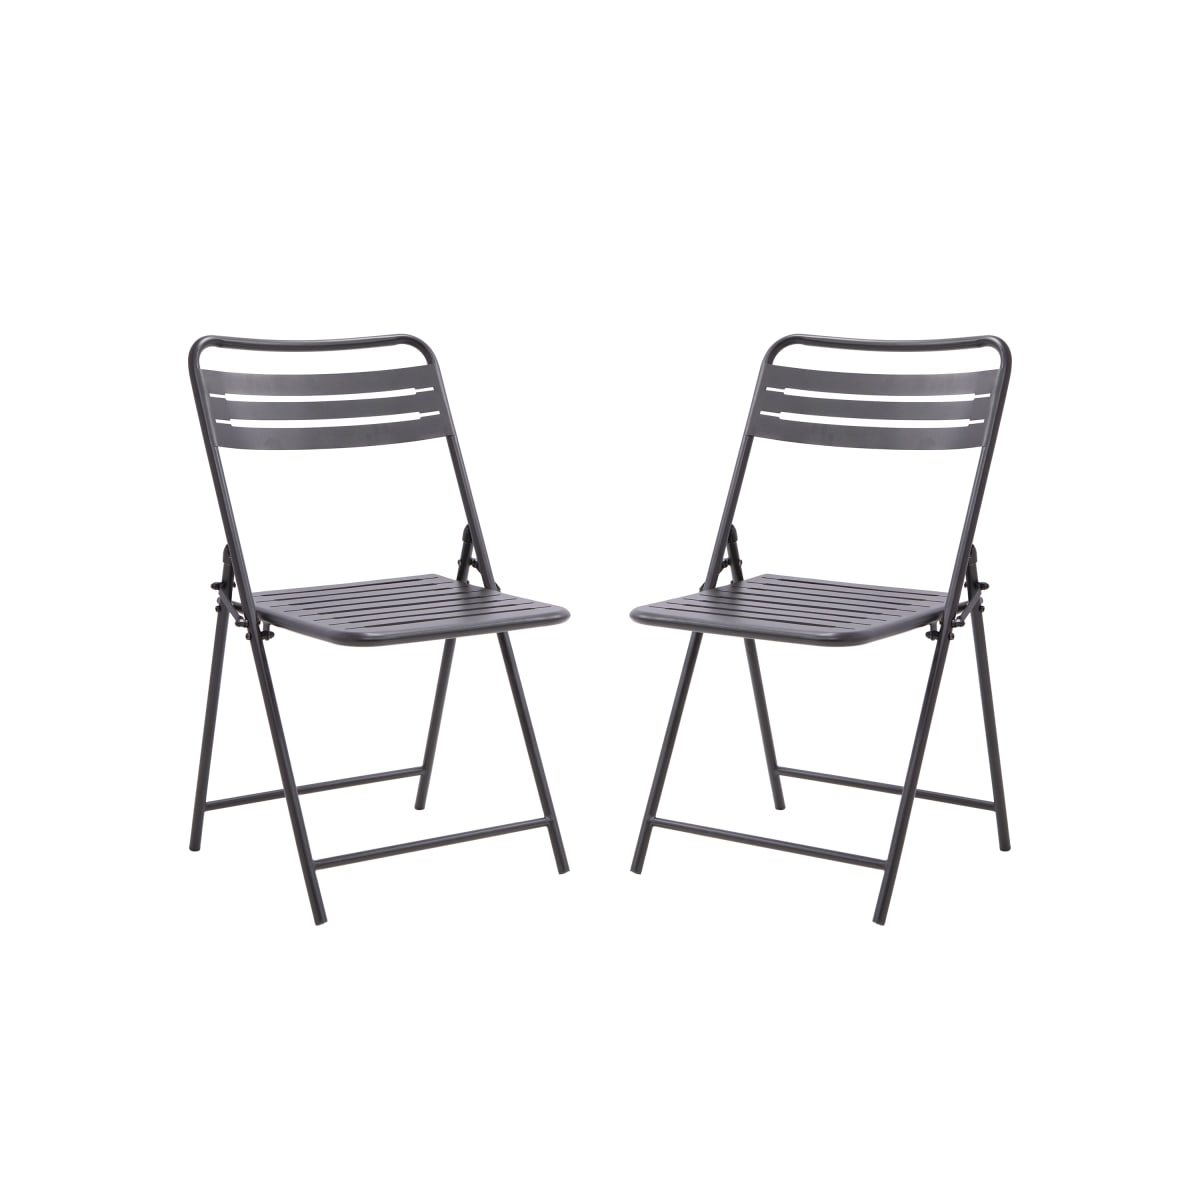 SET OF 2 FOLDING DINING CHAIRS CAFE II ORIGAMI STEEL ANTHRACITE